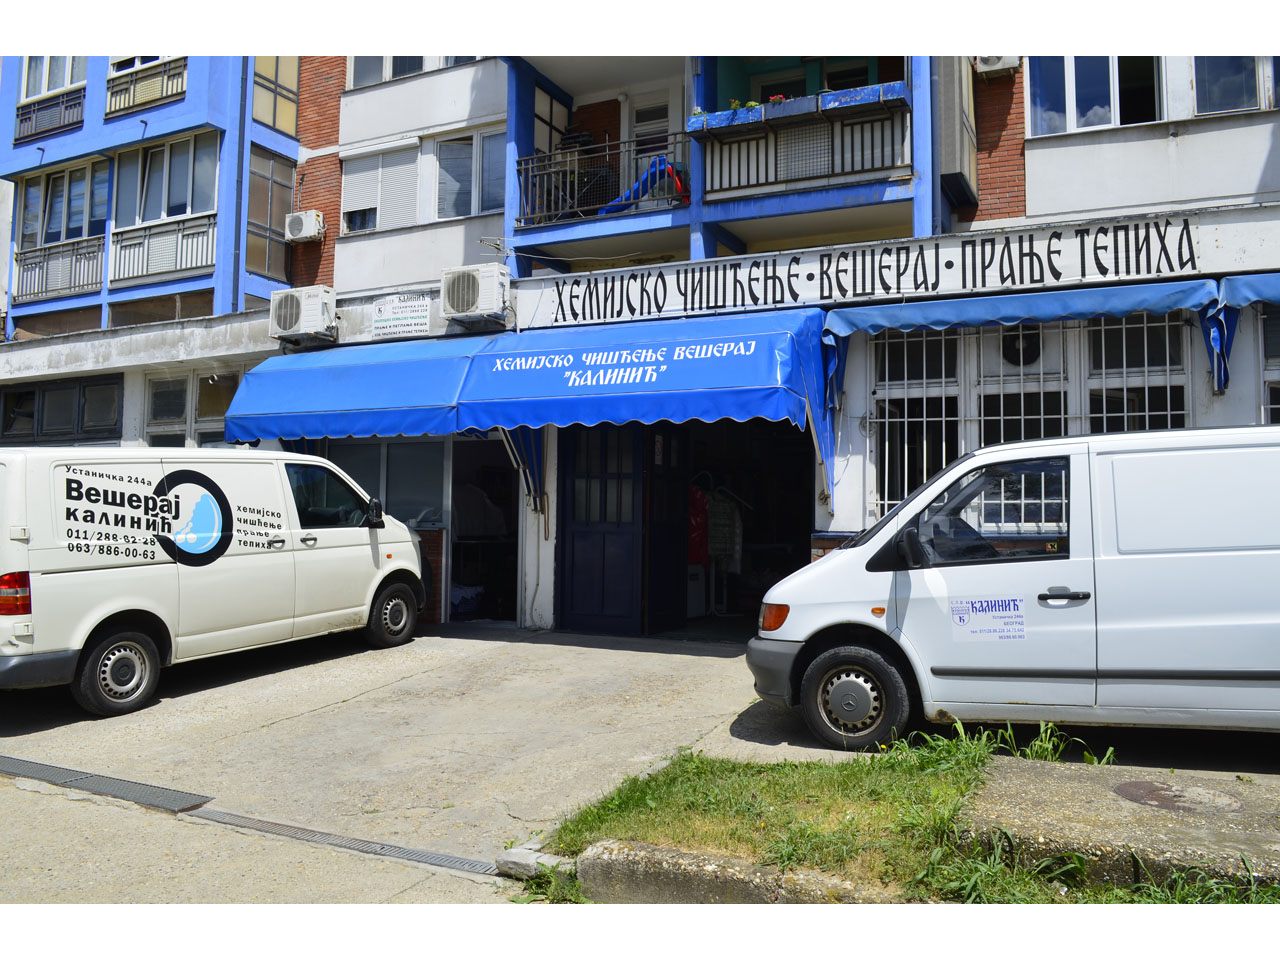 KALINIĆ M DRY CLEANING - LAUNDRY Dry-cleaning Beograd